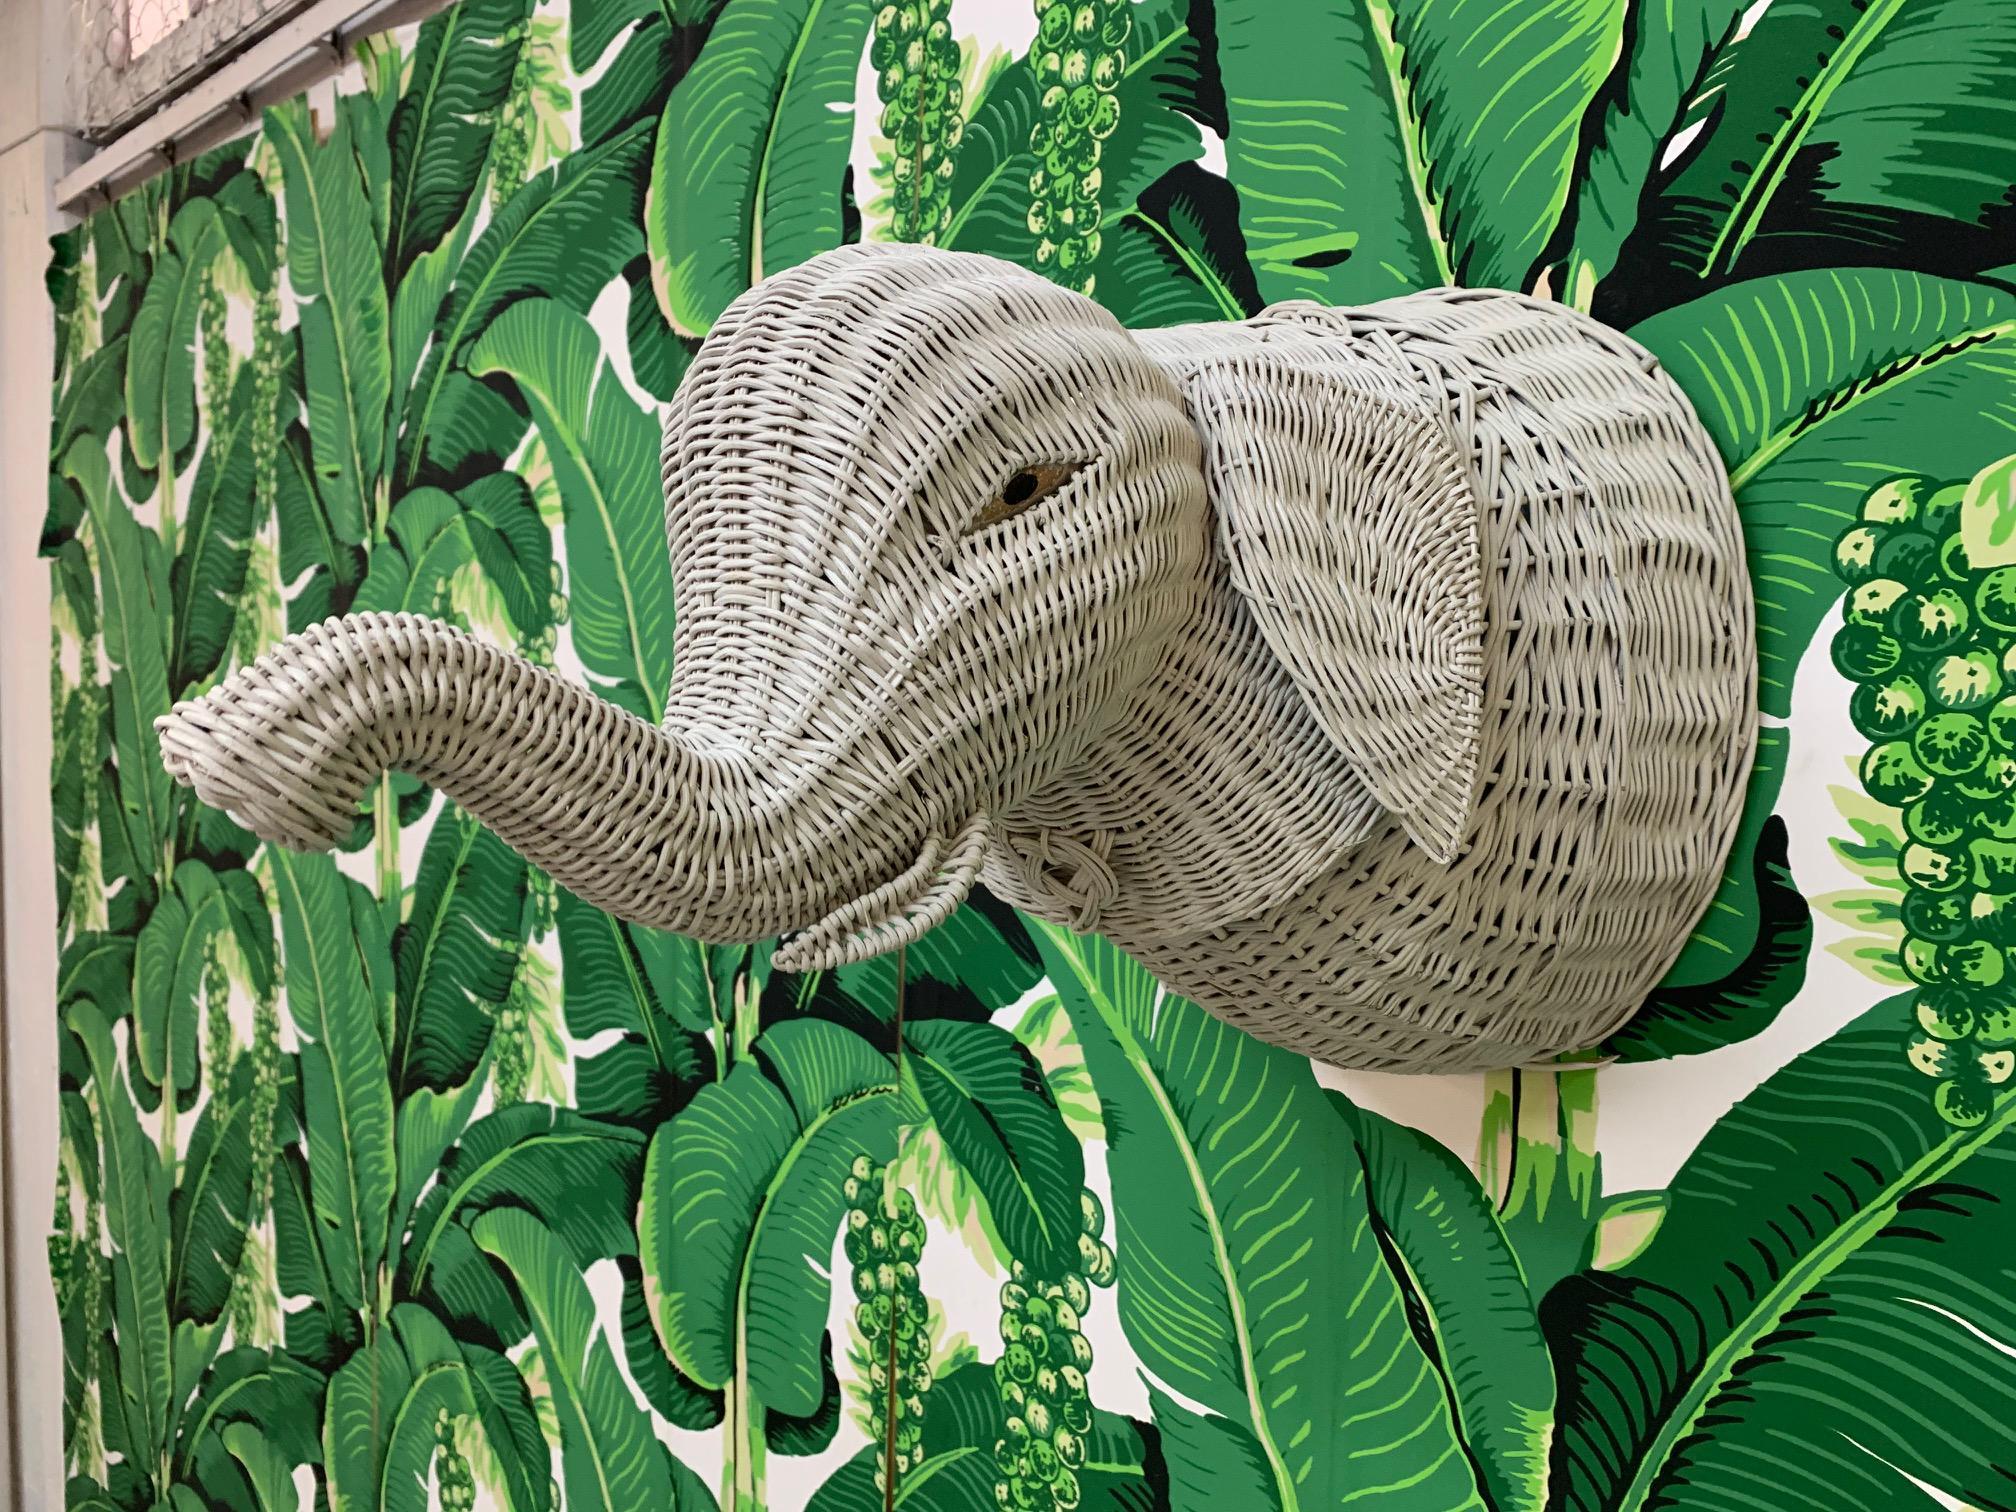 Vintage wicker elephant head to grace any wall and add a bit of whimsy to any decor. Good condition with only very minor imperfections consistent with age. 
 